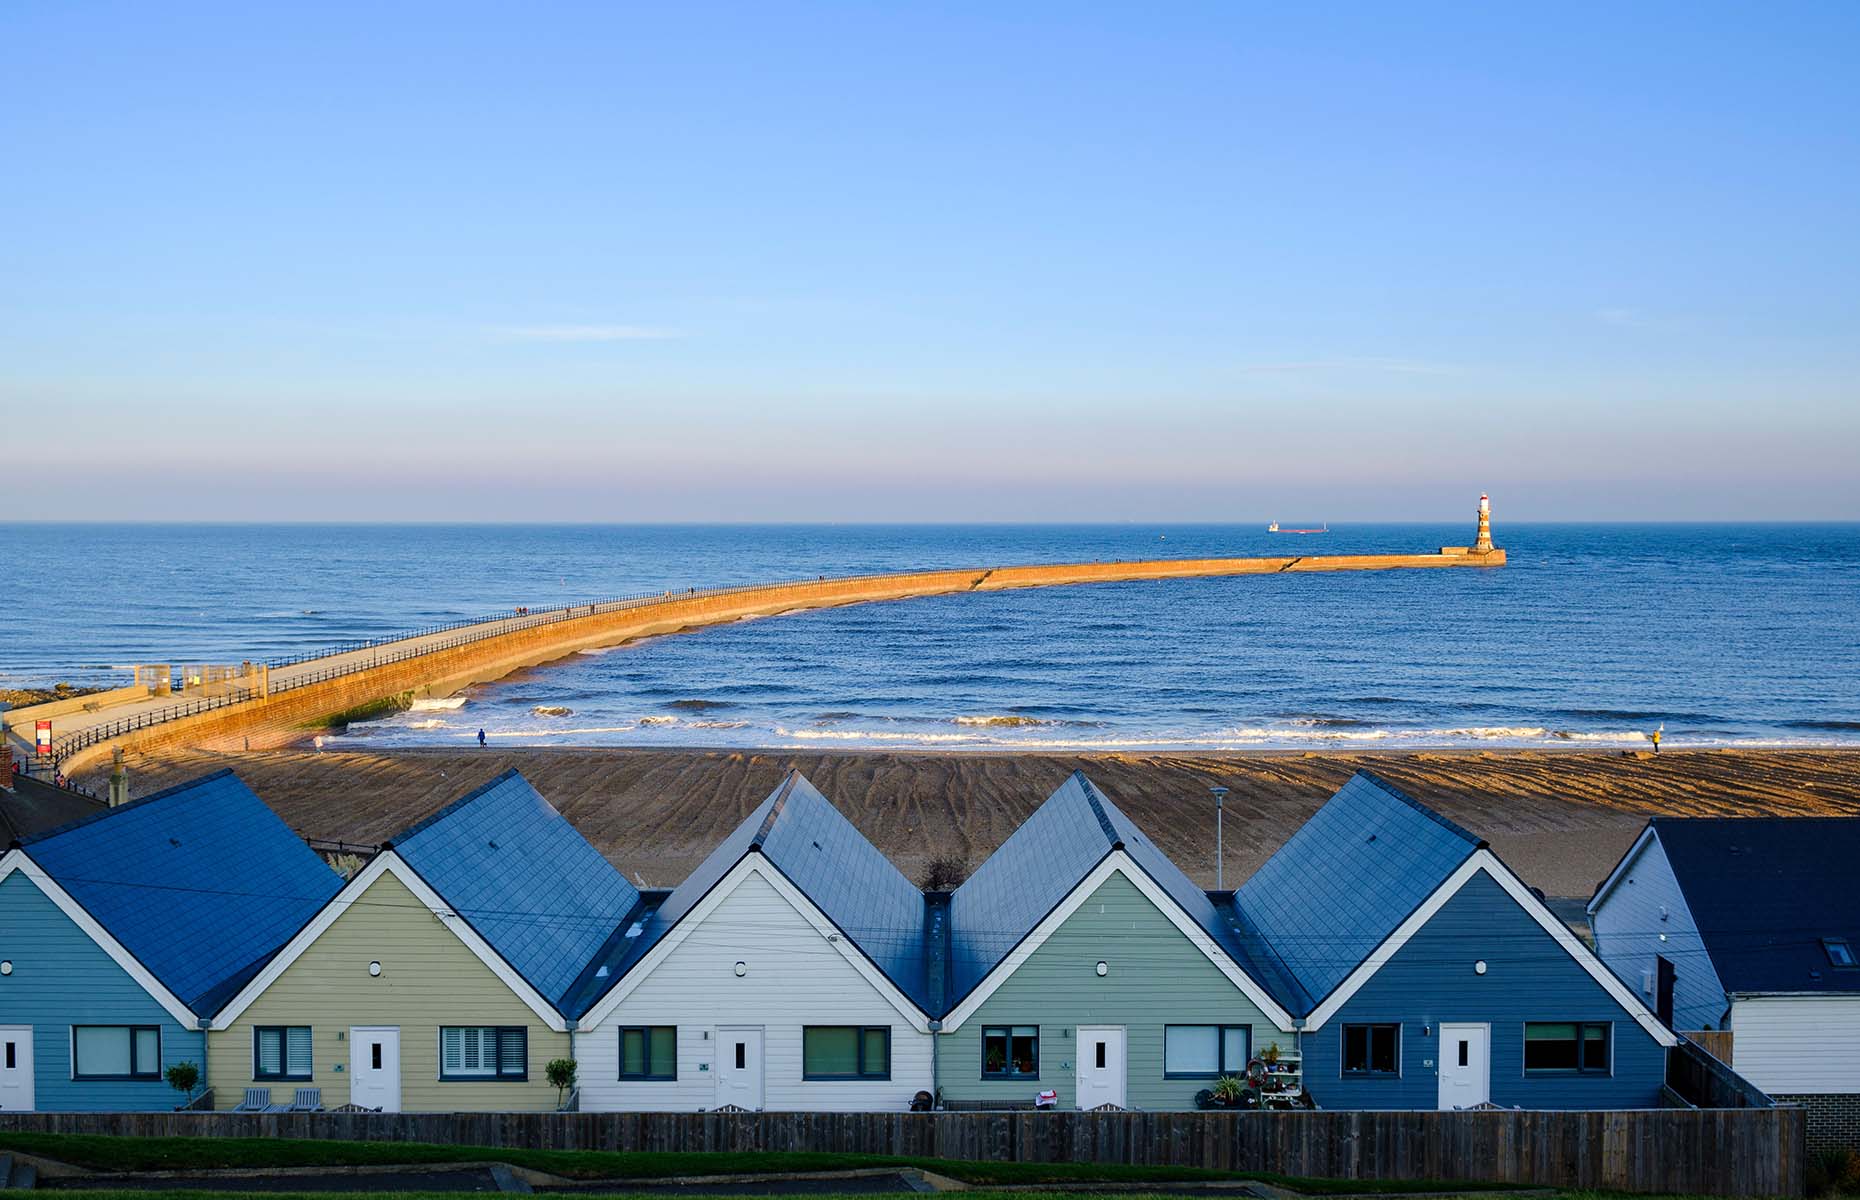 Roker Beach in Sunderland (Image: Clearview/Alamy Stock Photo)